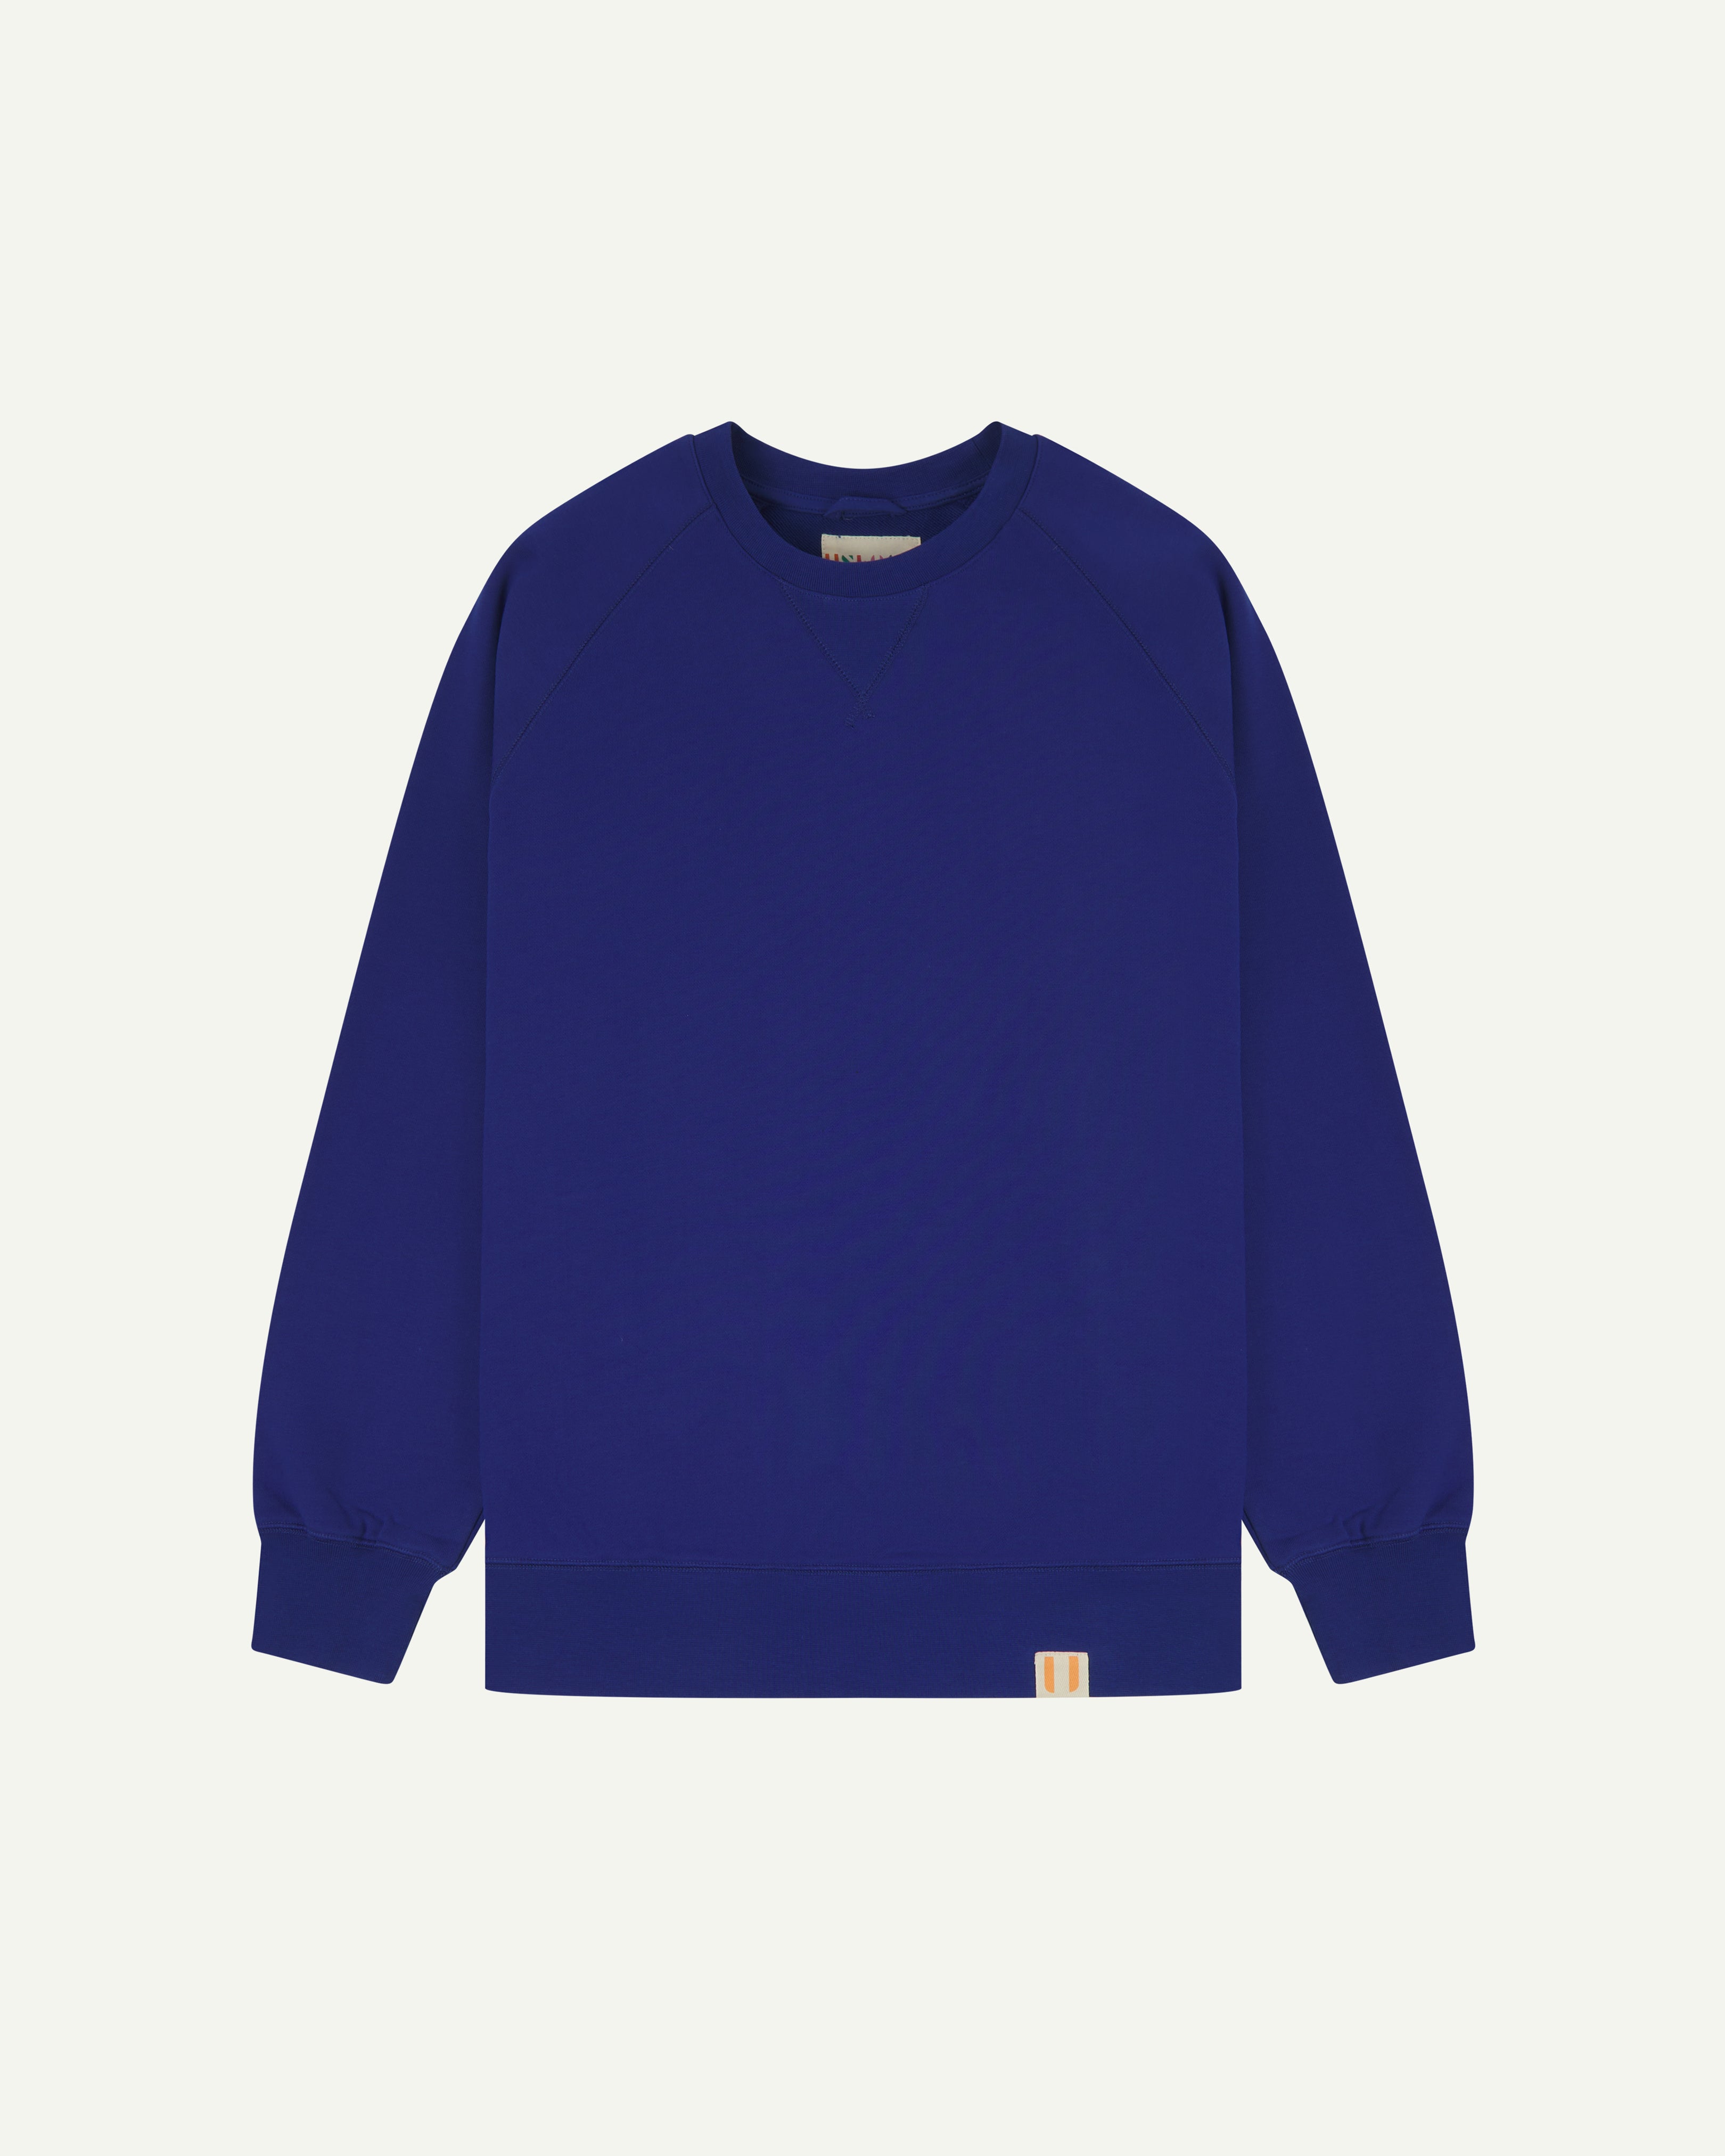 Front view of bright blue men's organic heavyweight cotton #7005 sweatshirt by Uskees